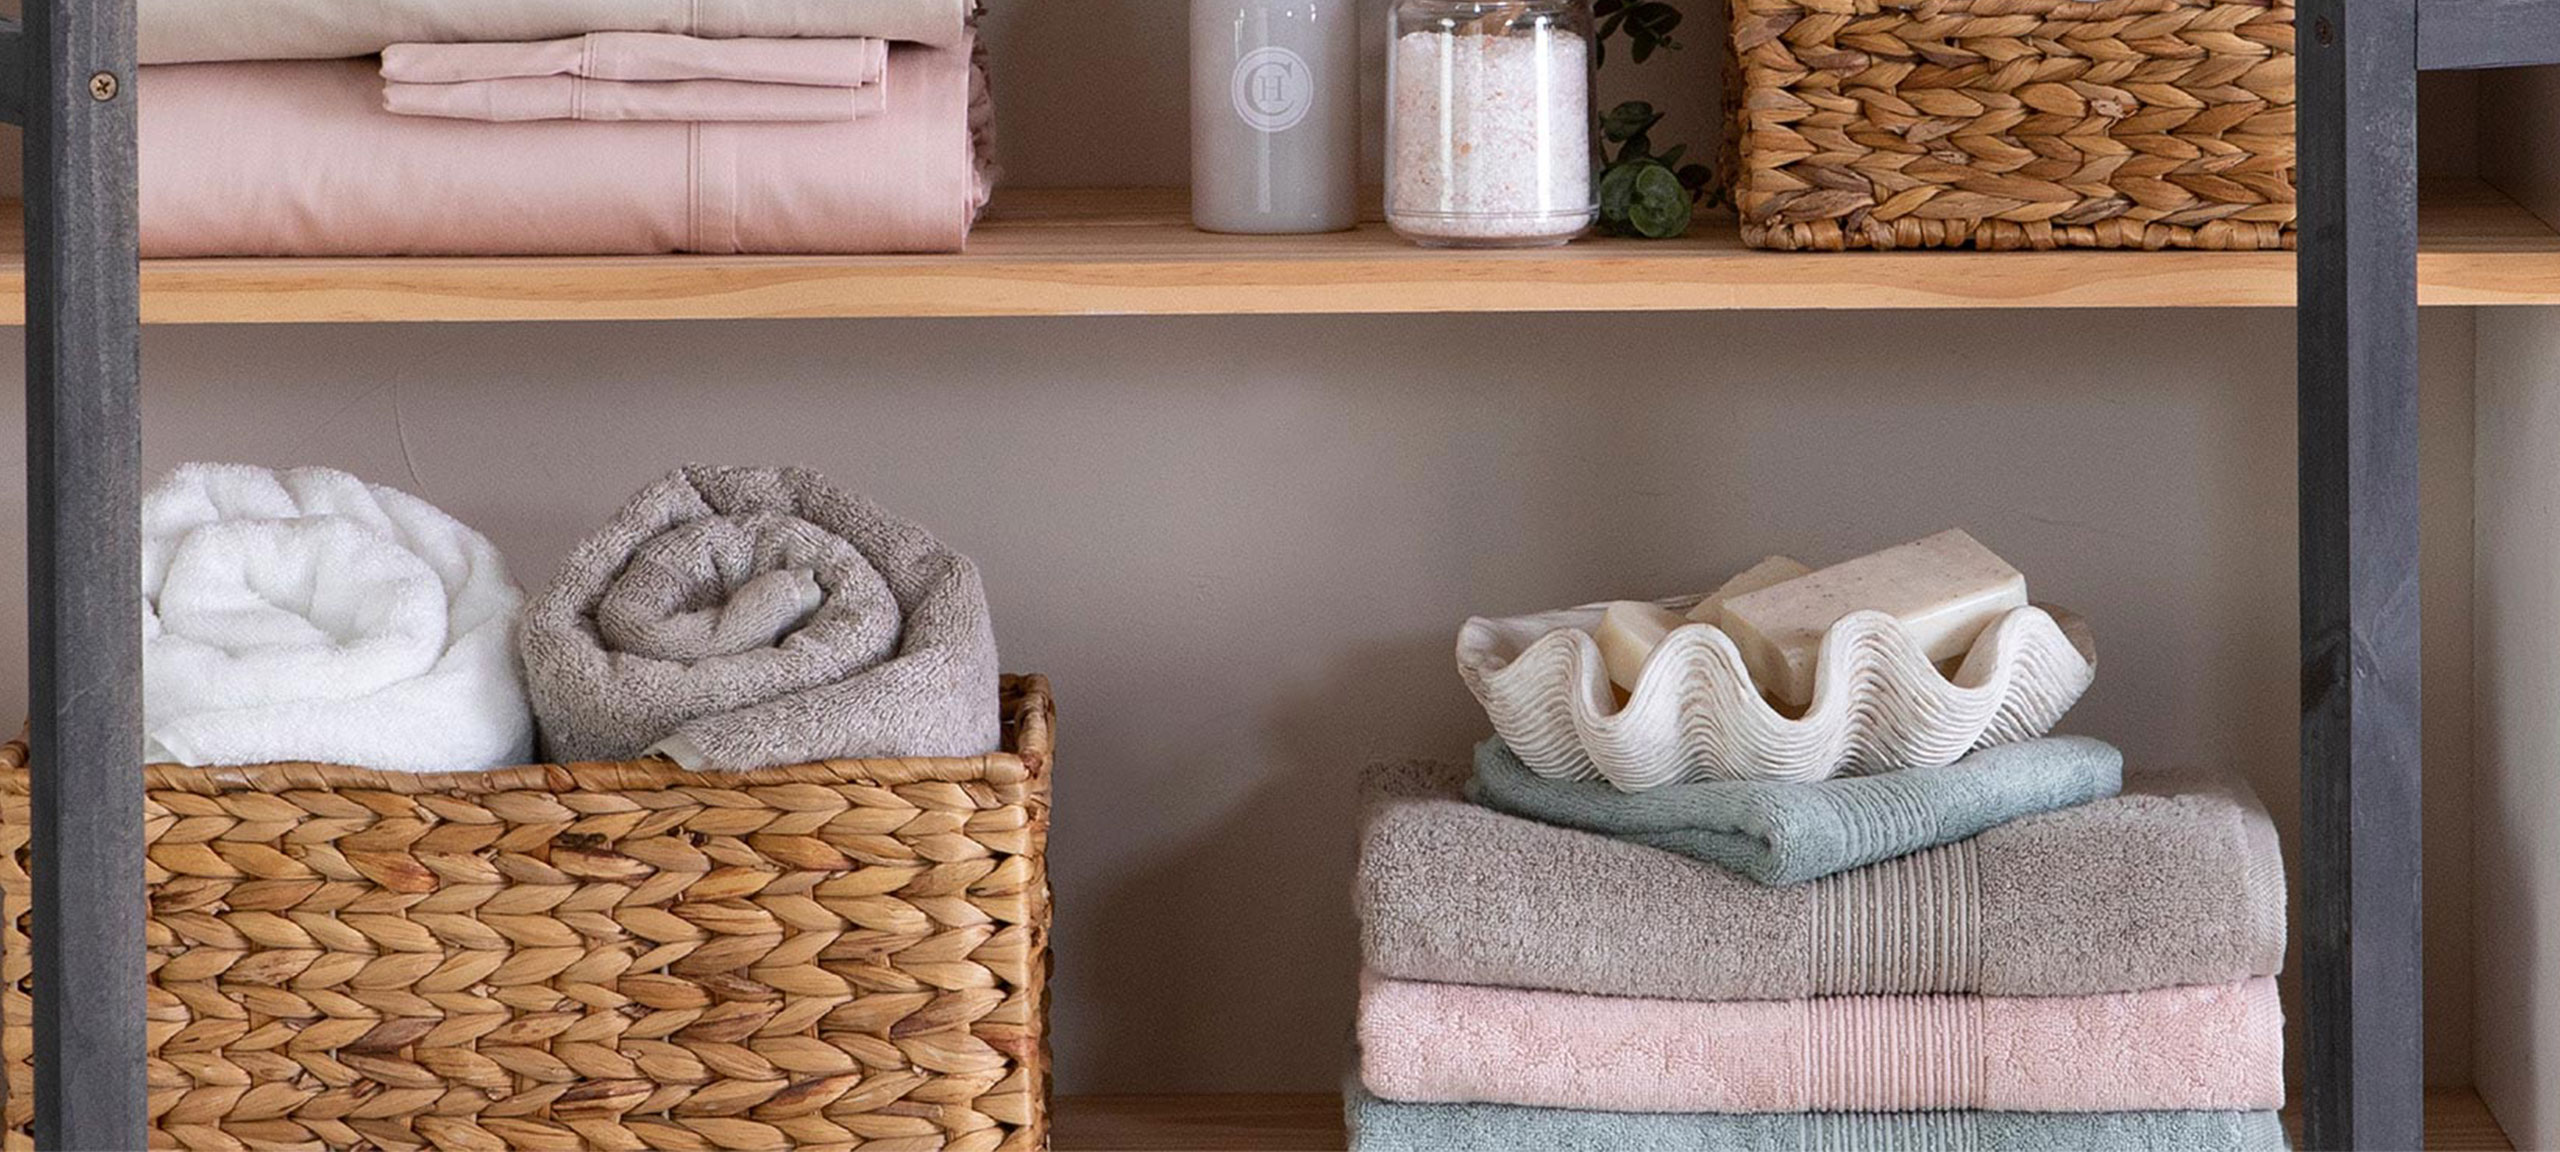 Towels rolled in a basket